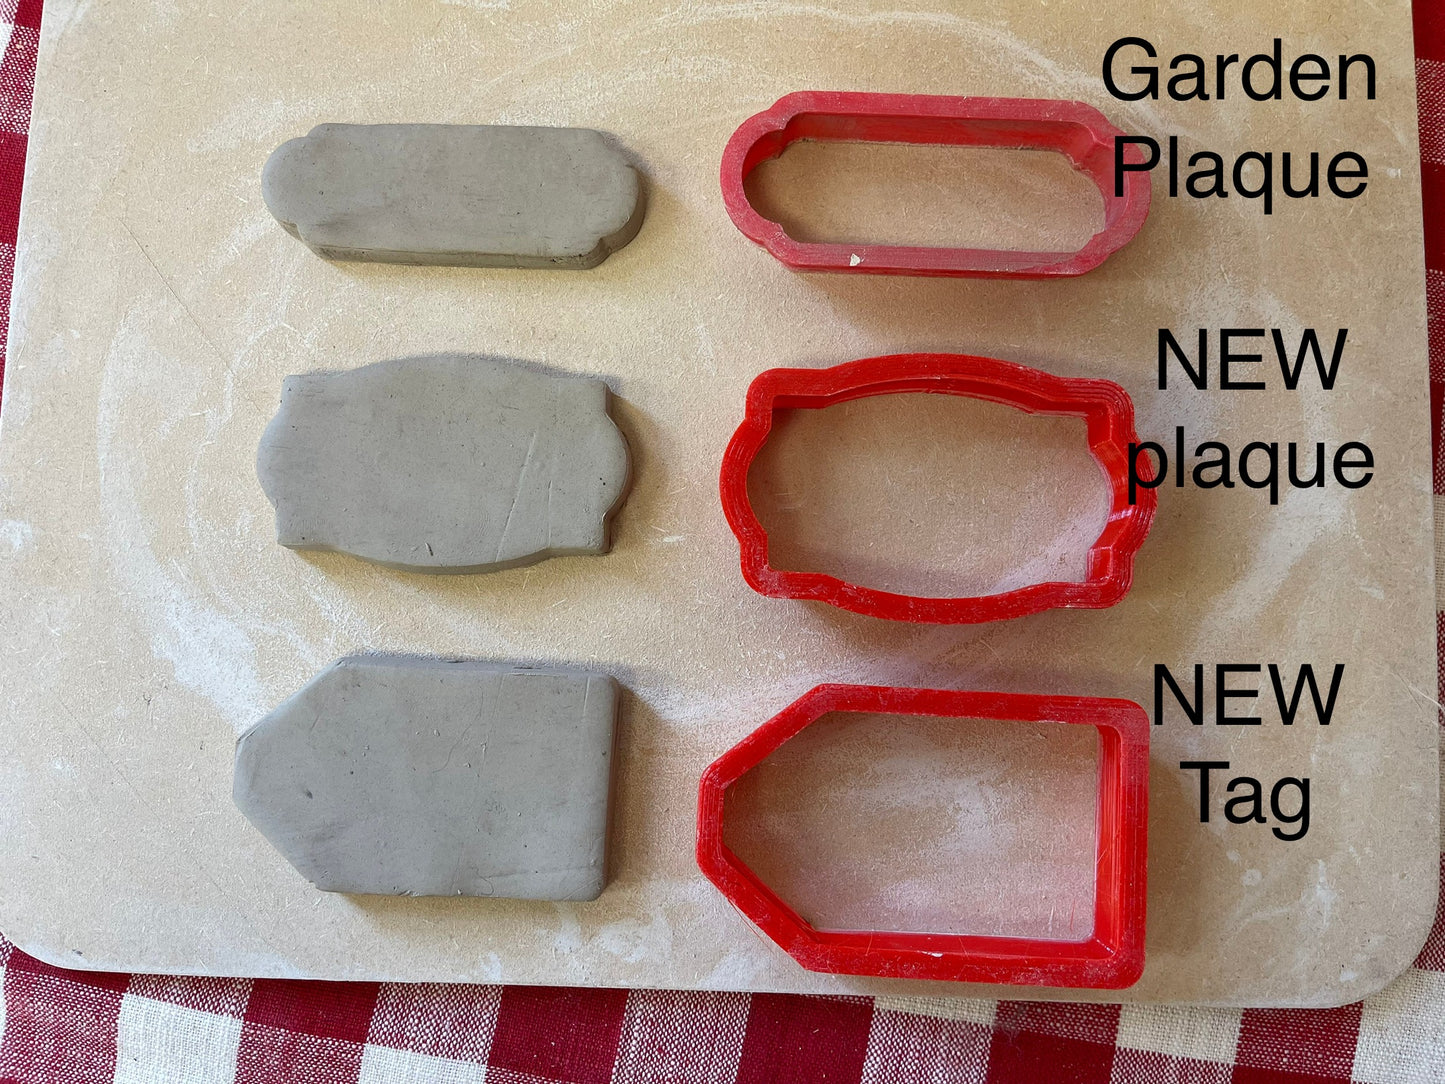 NEW Tag and Plaque Cutter Designs - Plastic 3D Printed, set or each